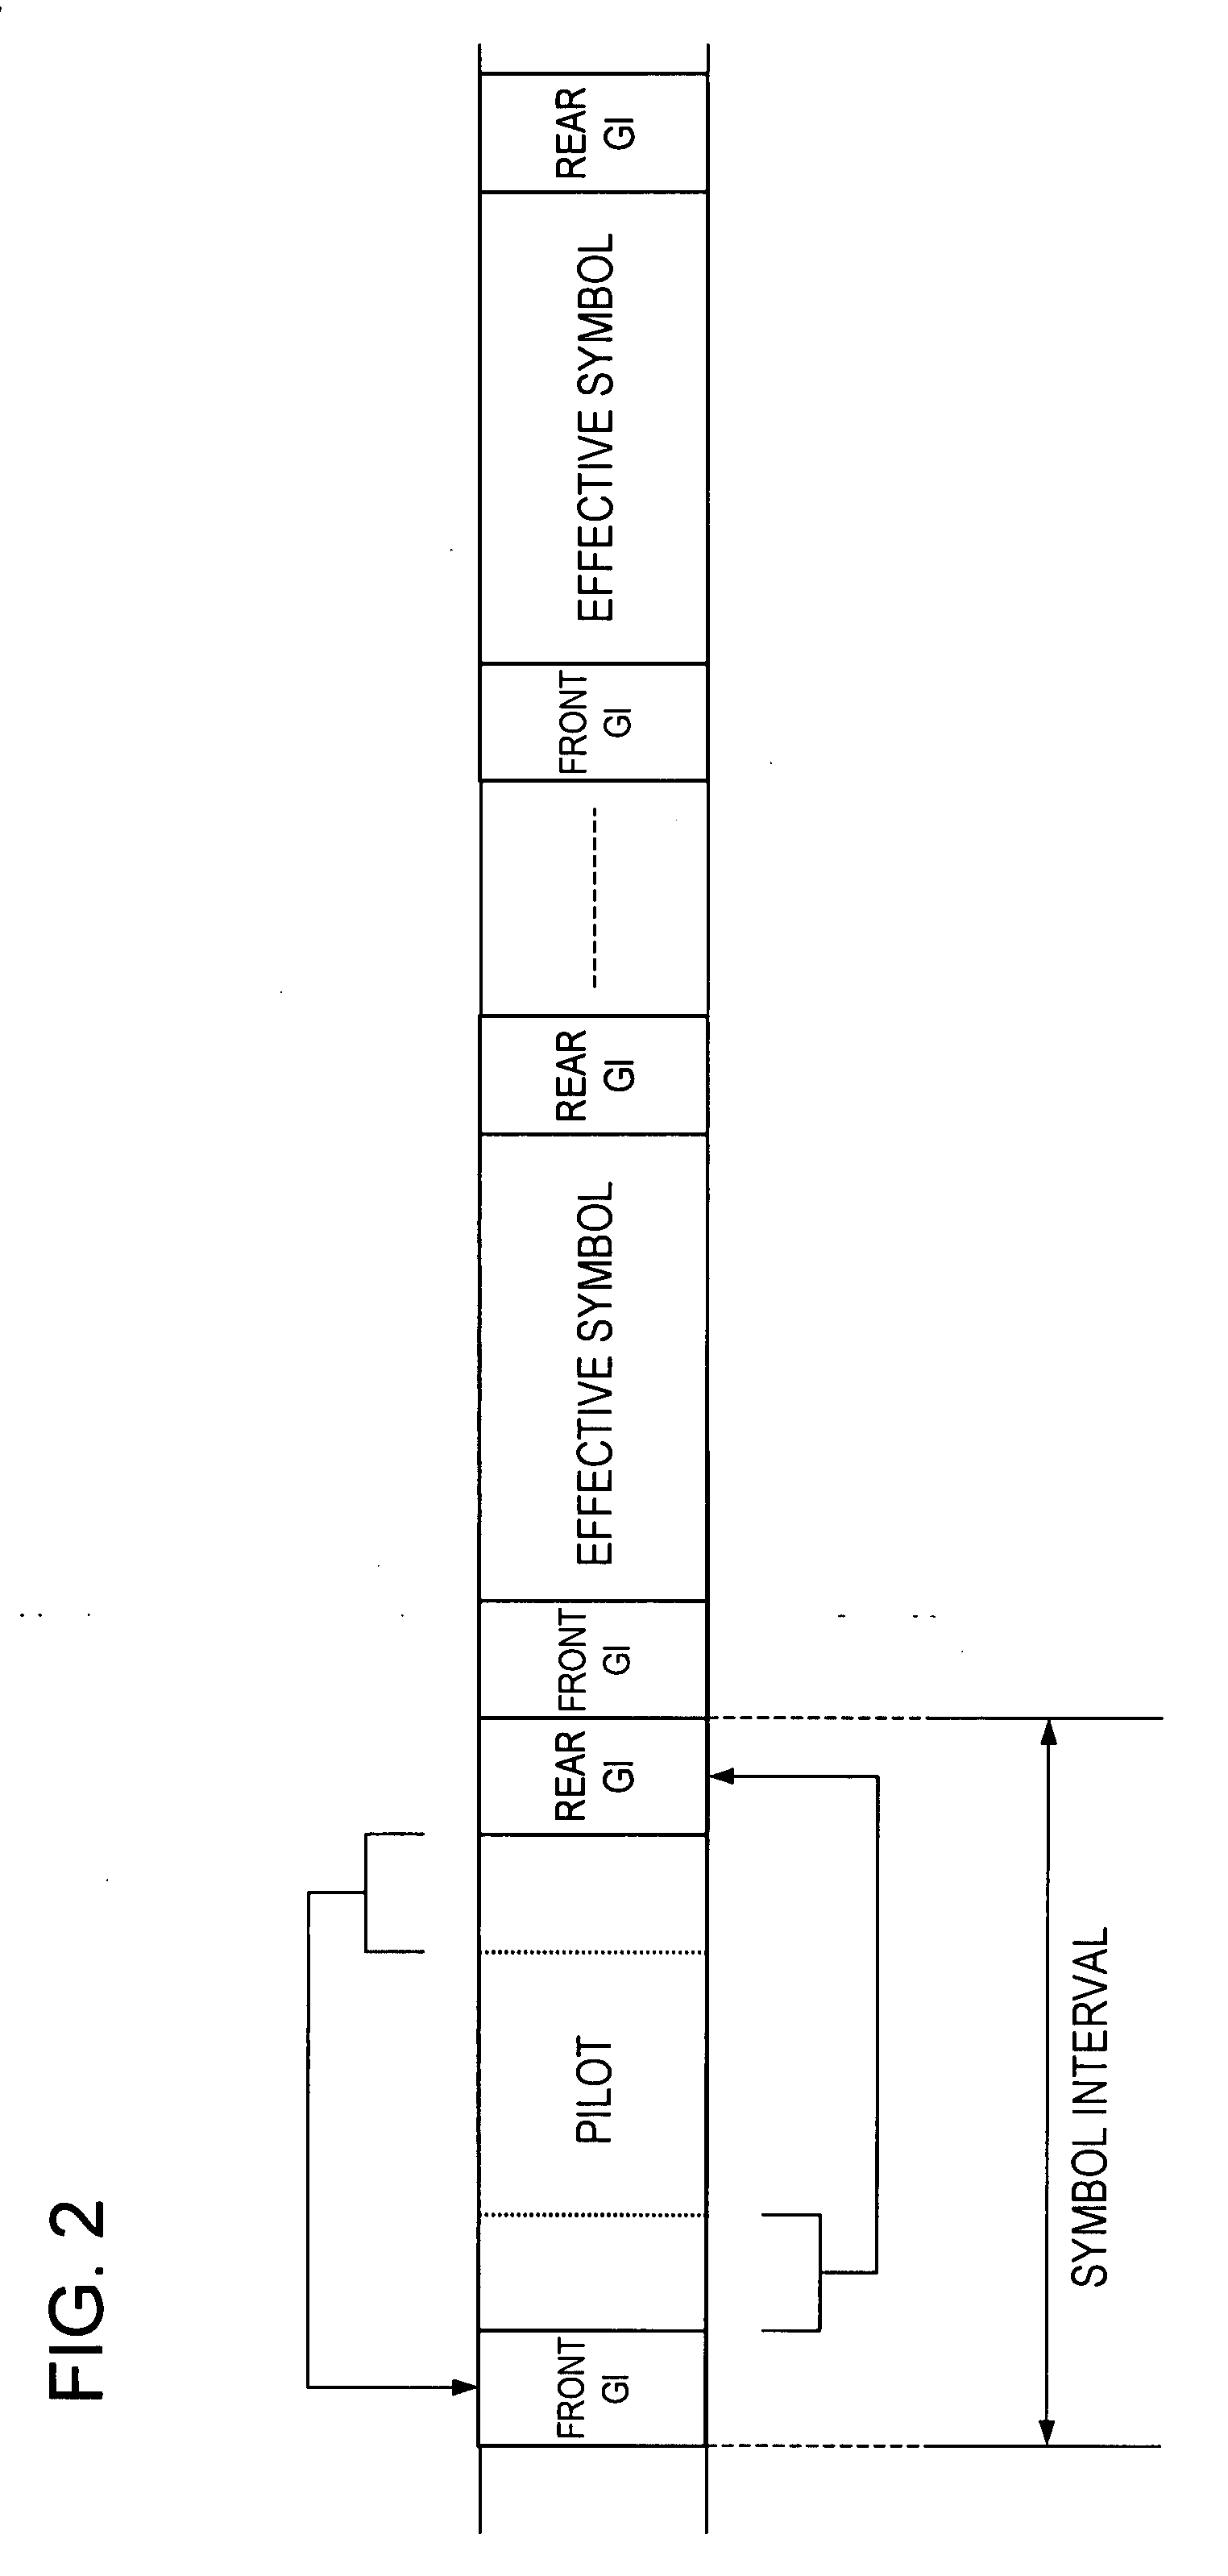 Frequency division communication system